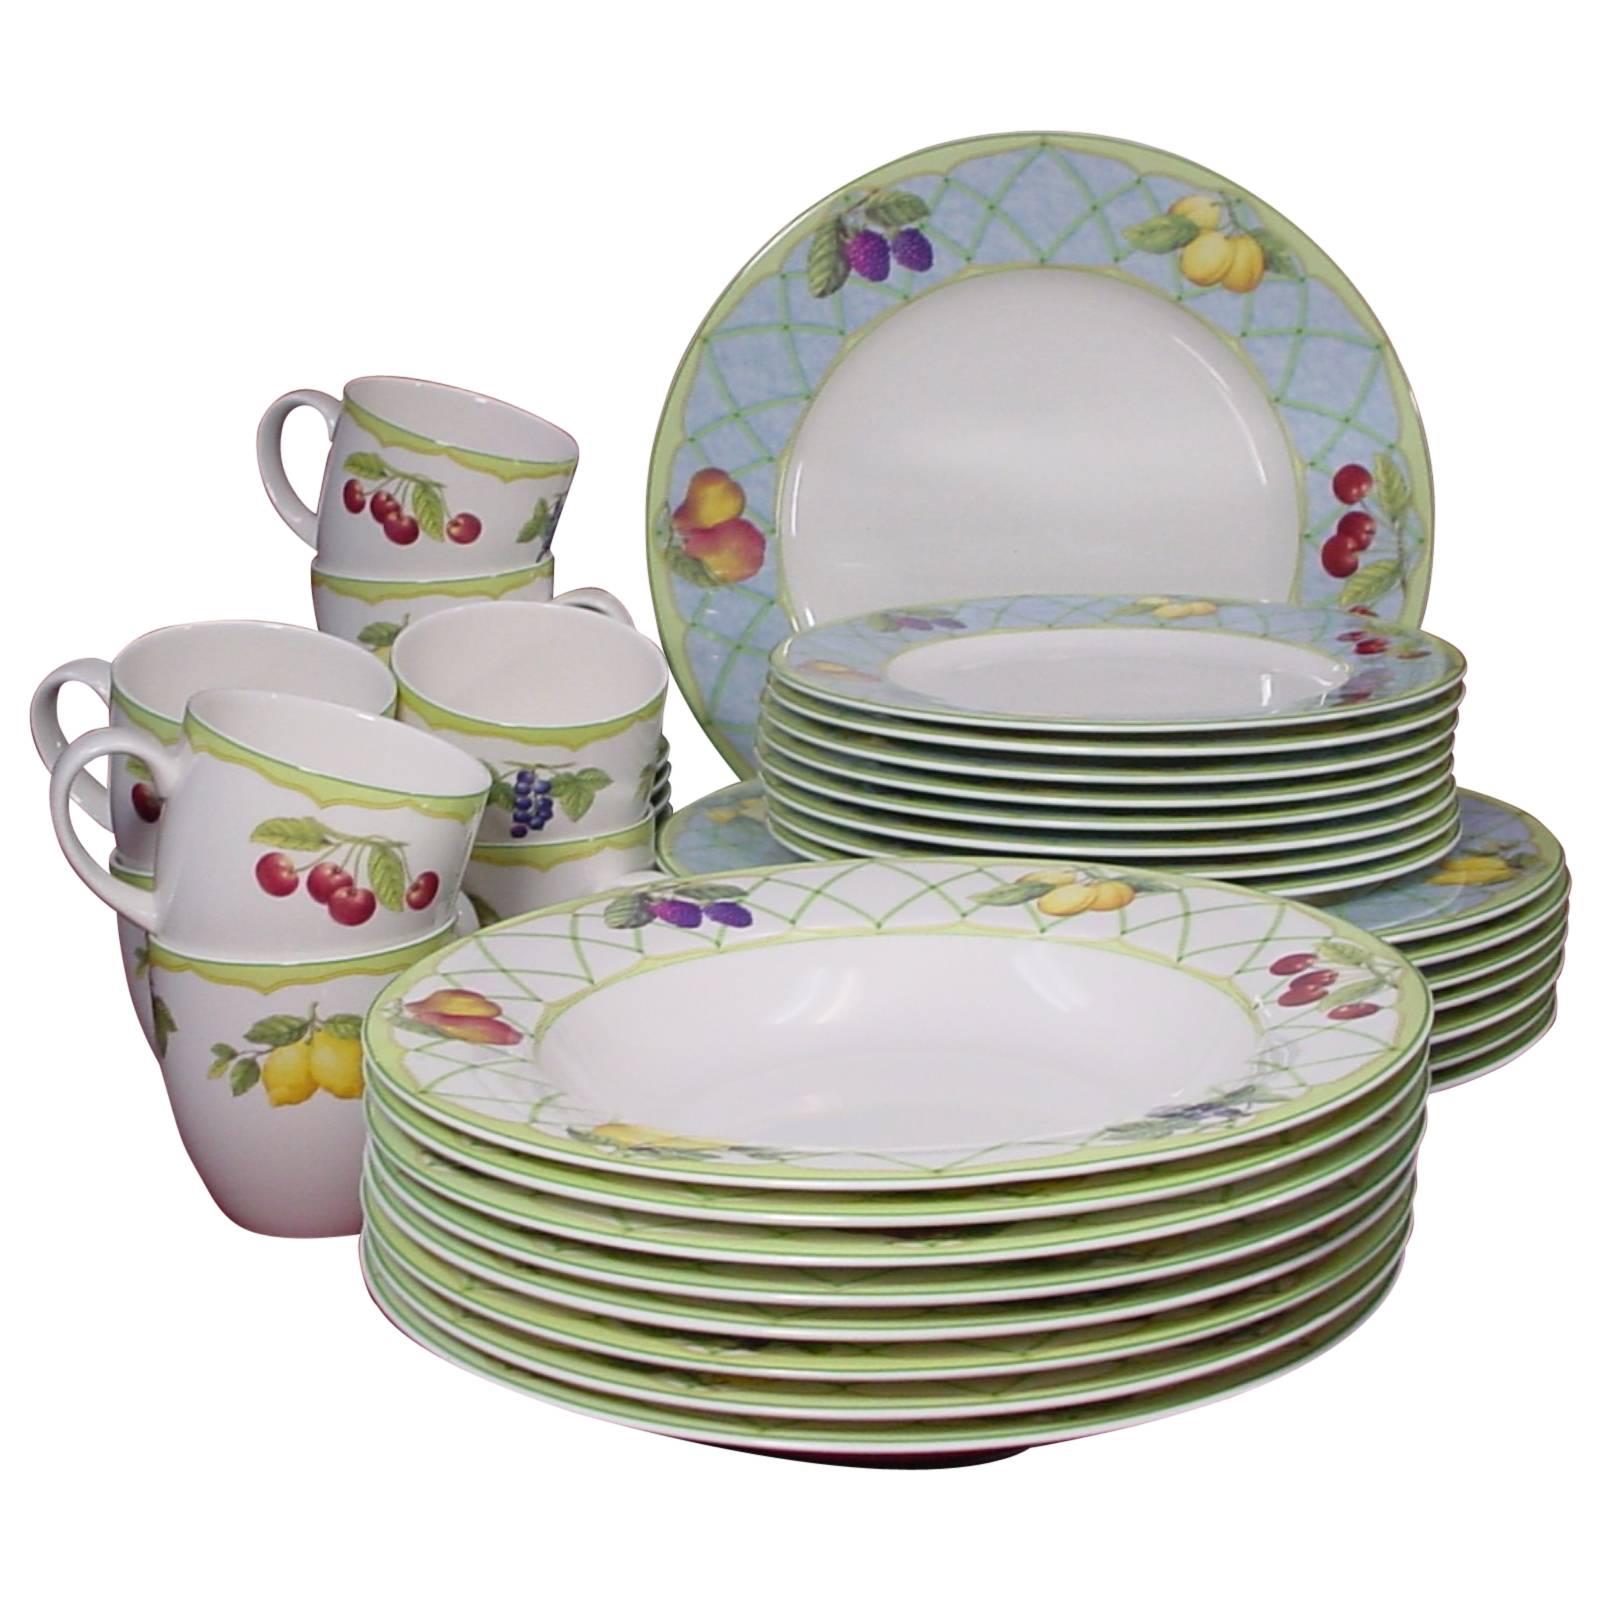 Mikasa China Fruit Rapture Y4001 Pattern 40-Piece Set Service for Eight